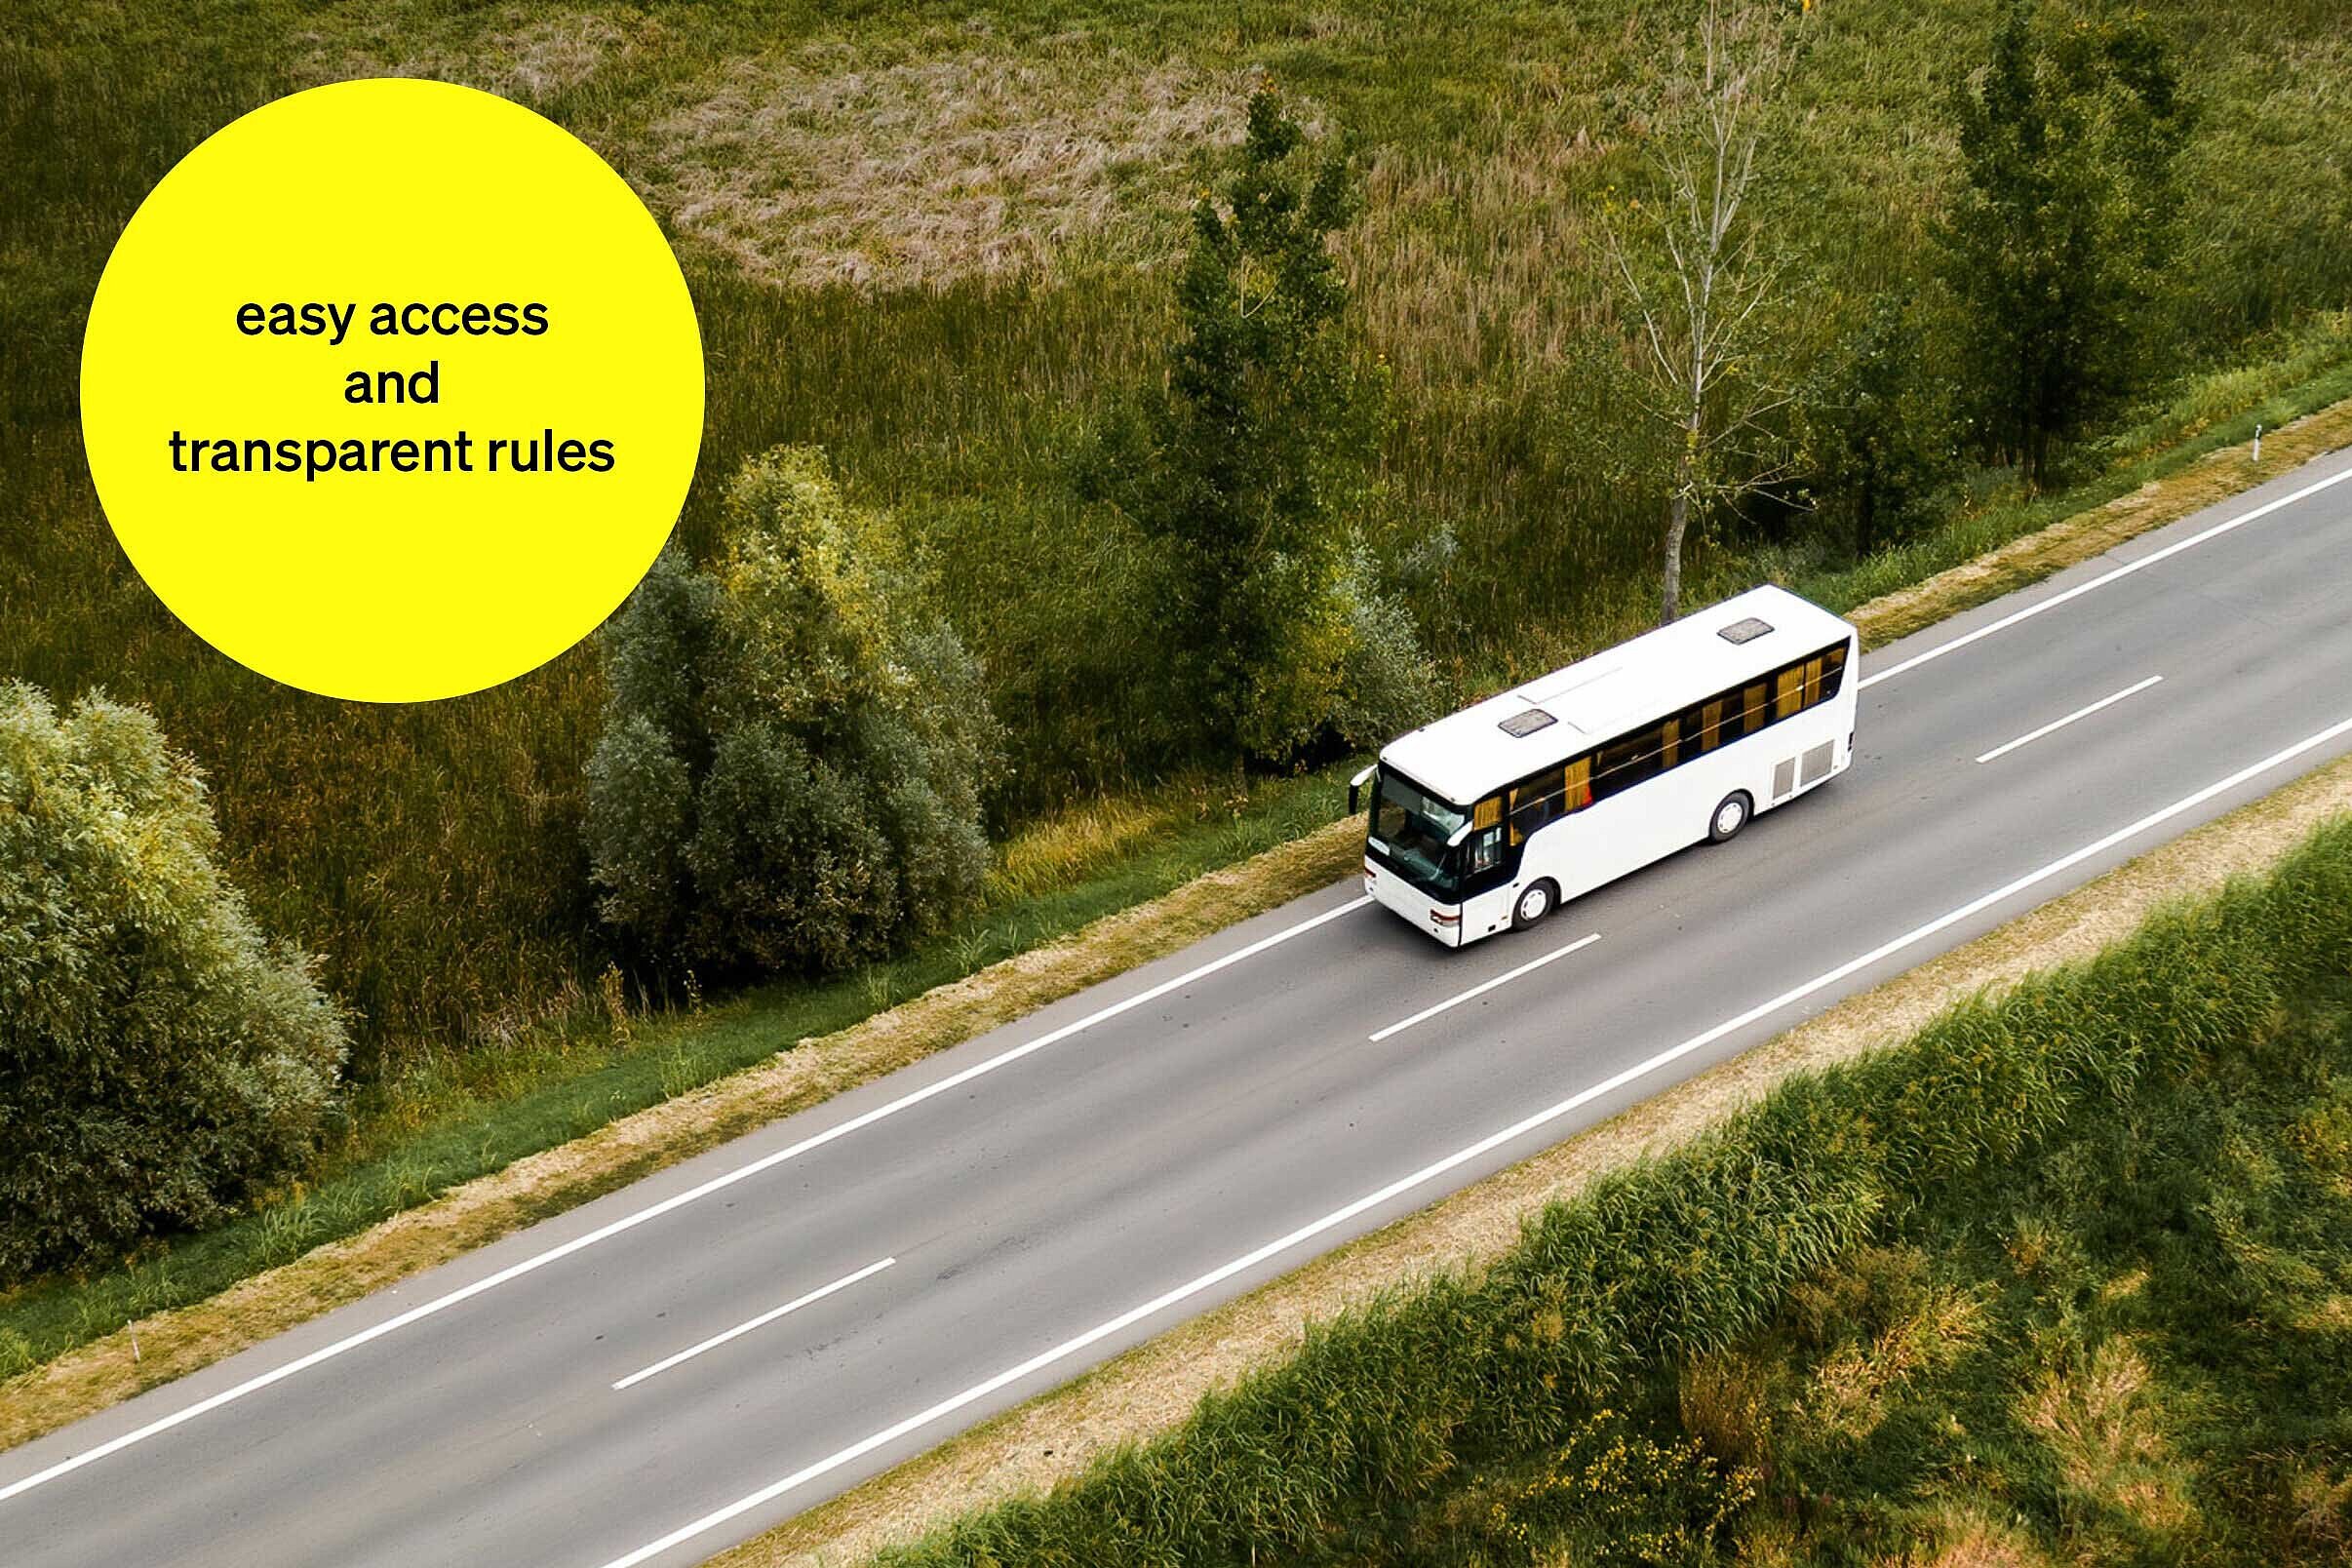 White bus driving on an open road through green landscape - text module in round tile: easy access and transparent rules